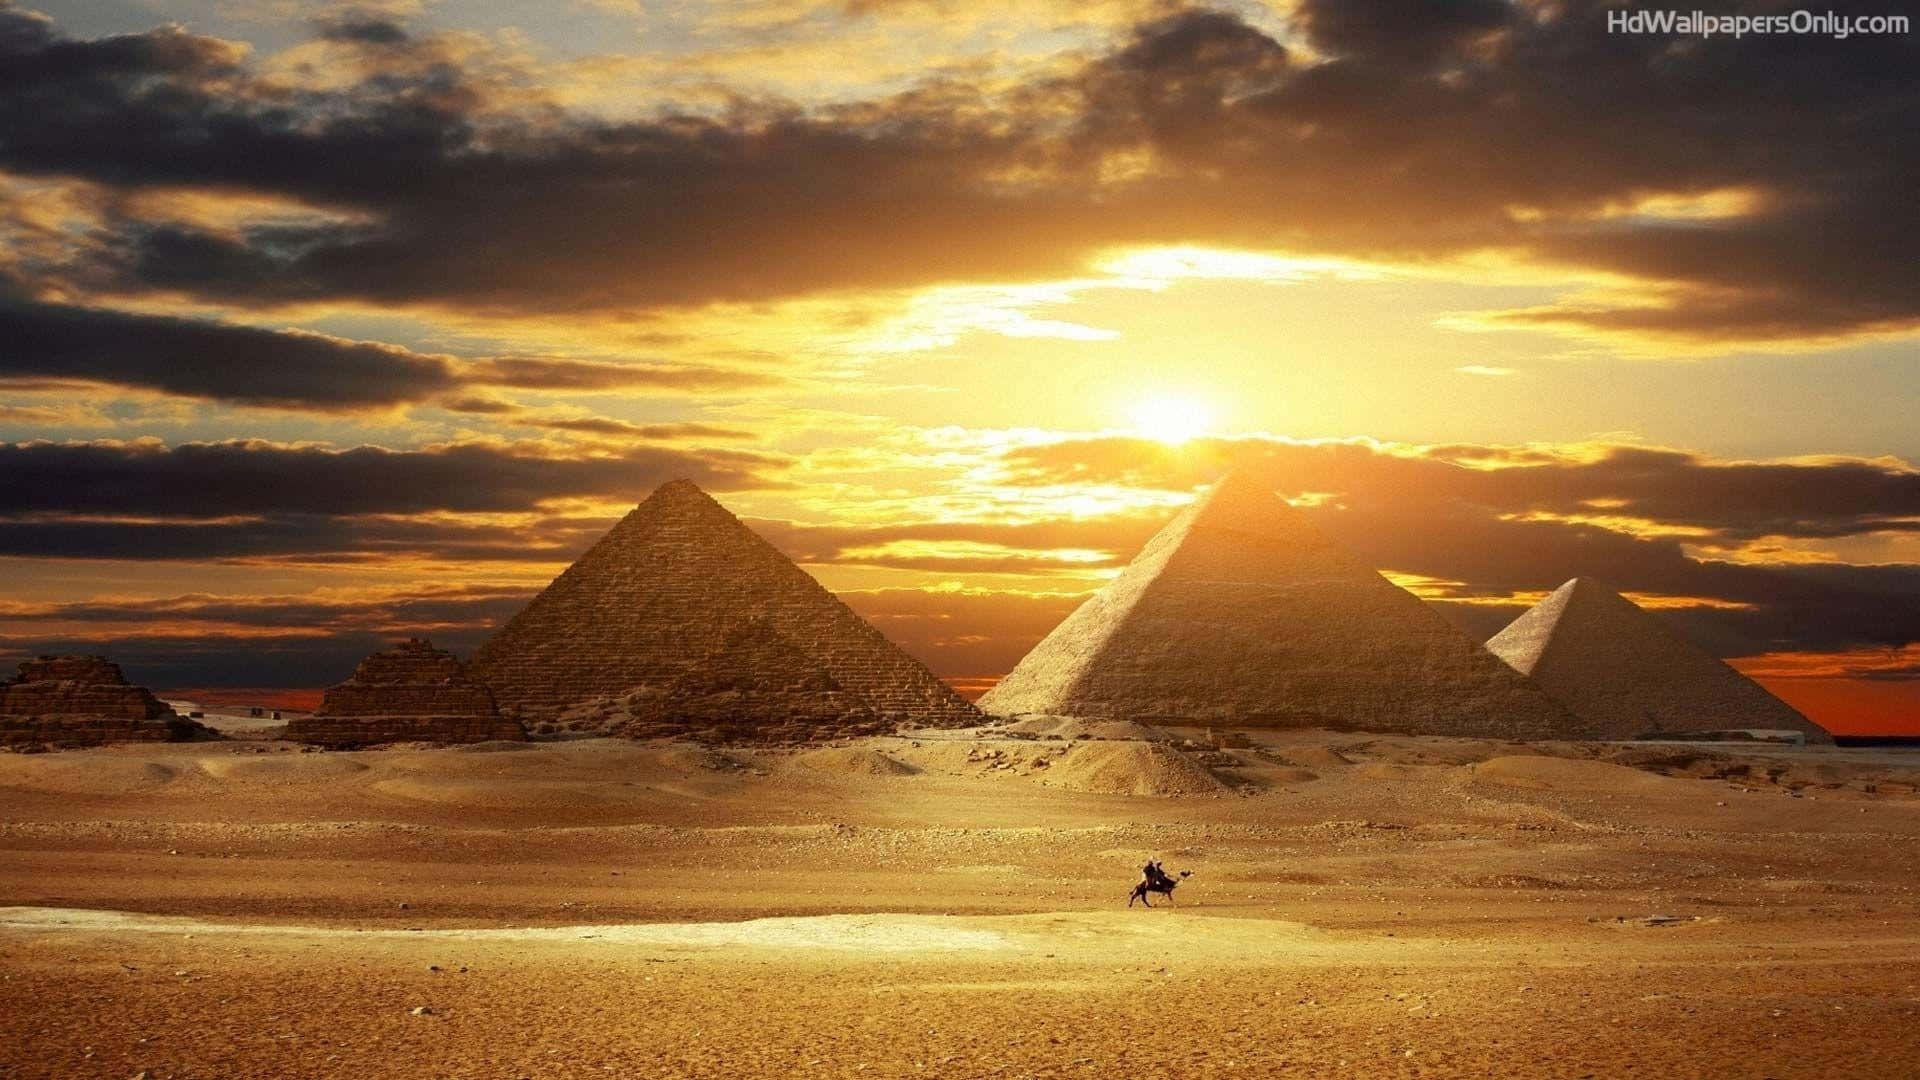 A Man Is Standing In Front Of The Pyramids At Sunset Wallpaper